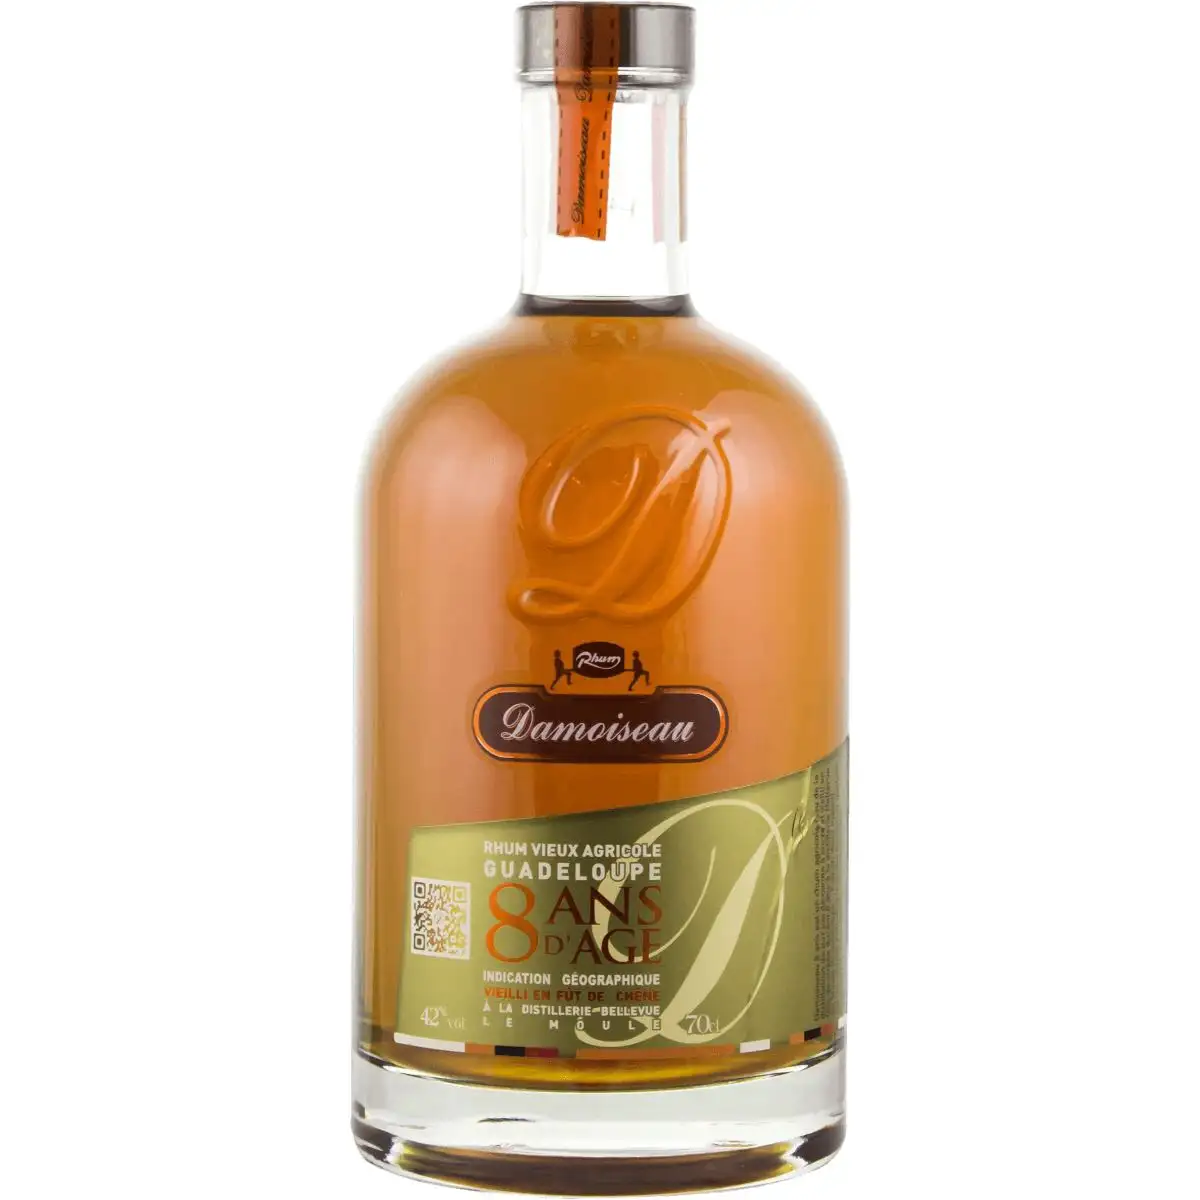 Image of the front of the bottle of the rum Rhum Vieux Agricole Guadeloupe 8 Ans d‘Age